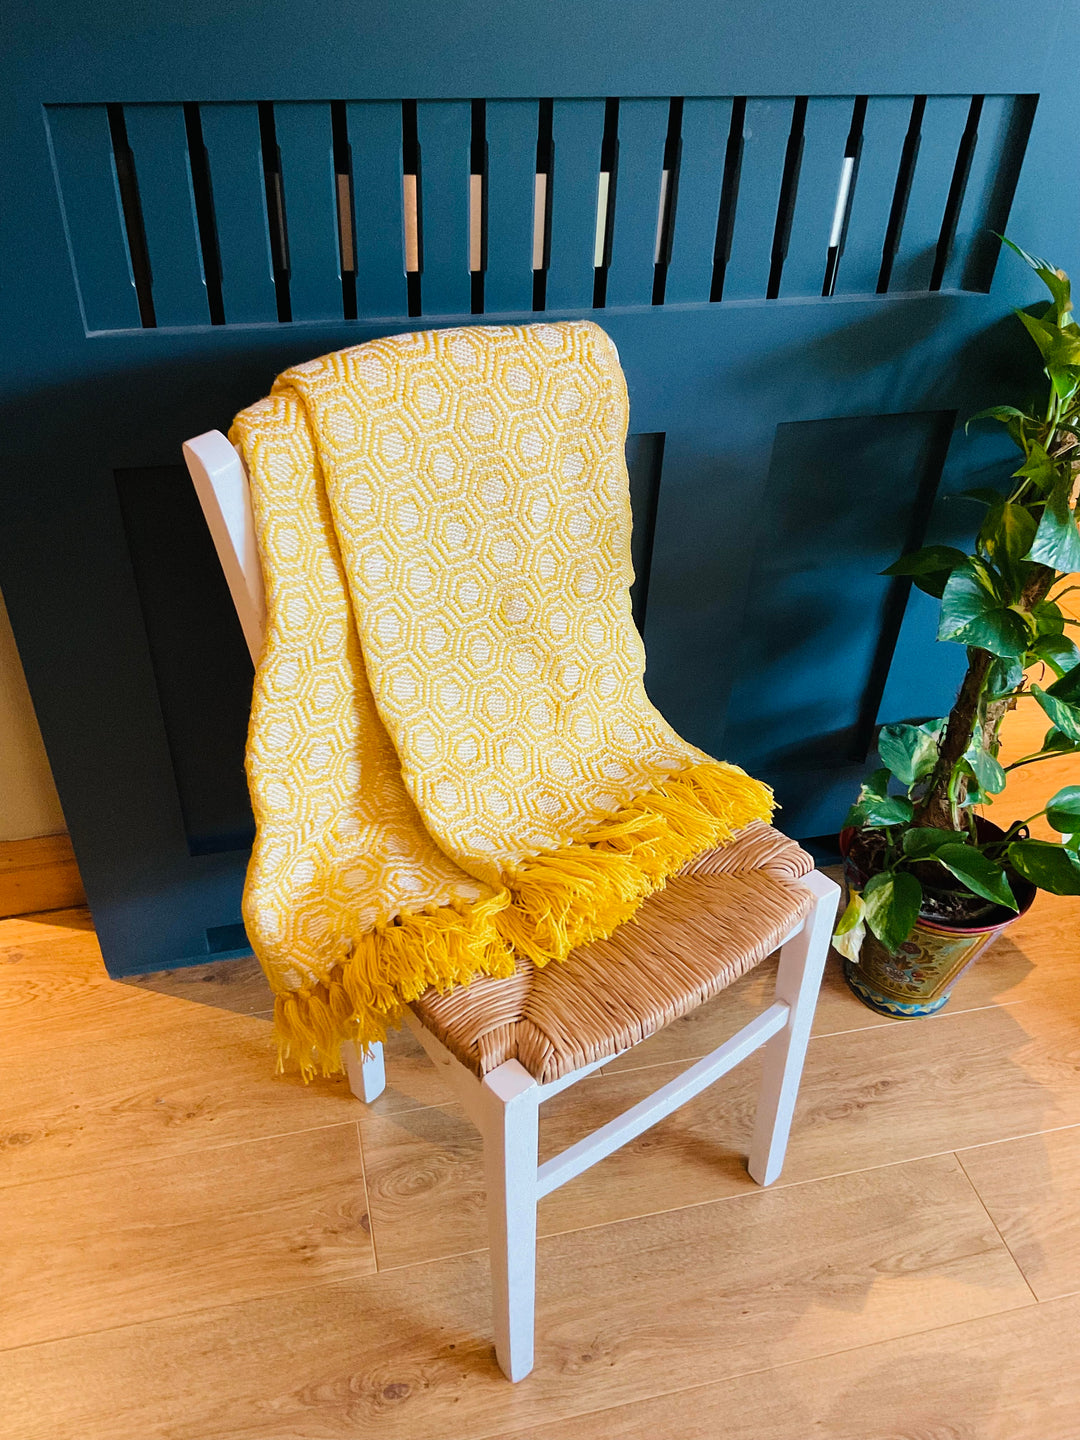 Yellow Honeycomb Patterned Soft Throw Durable and Washable With Fringe 125 x 150 cm